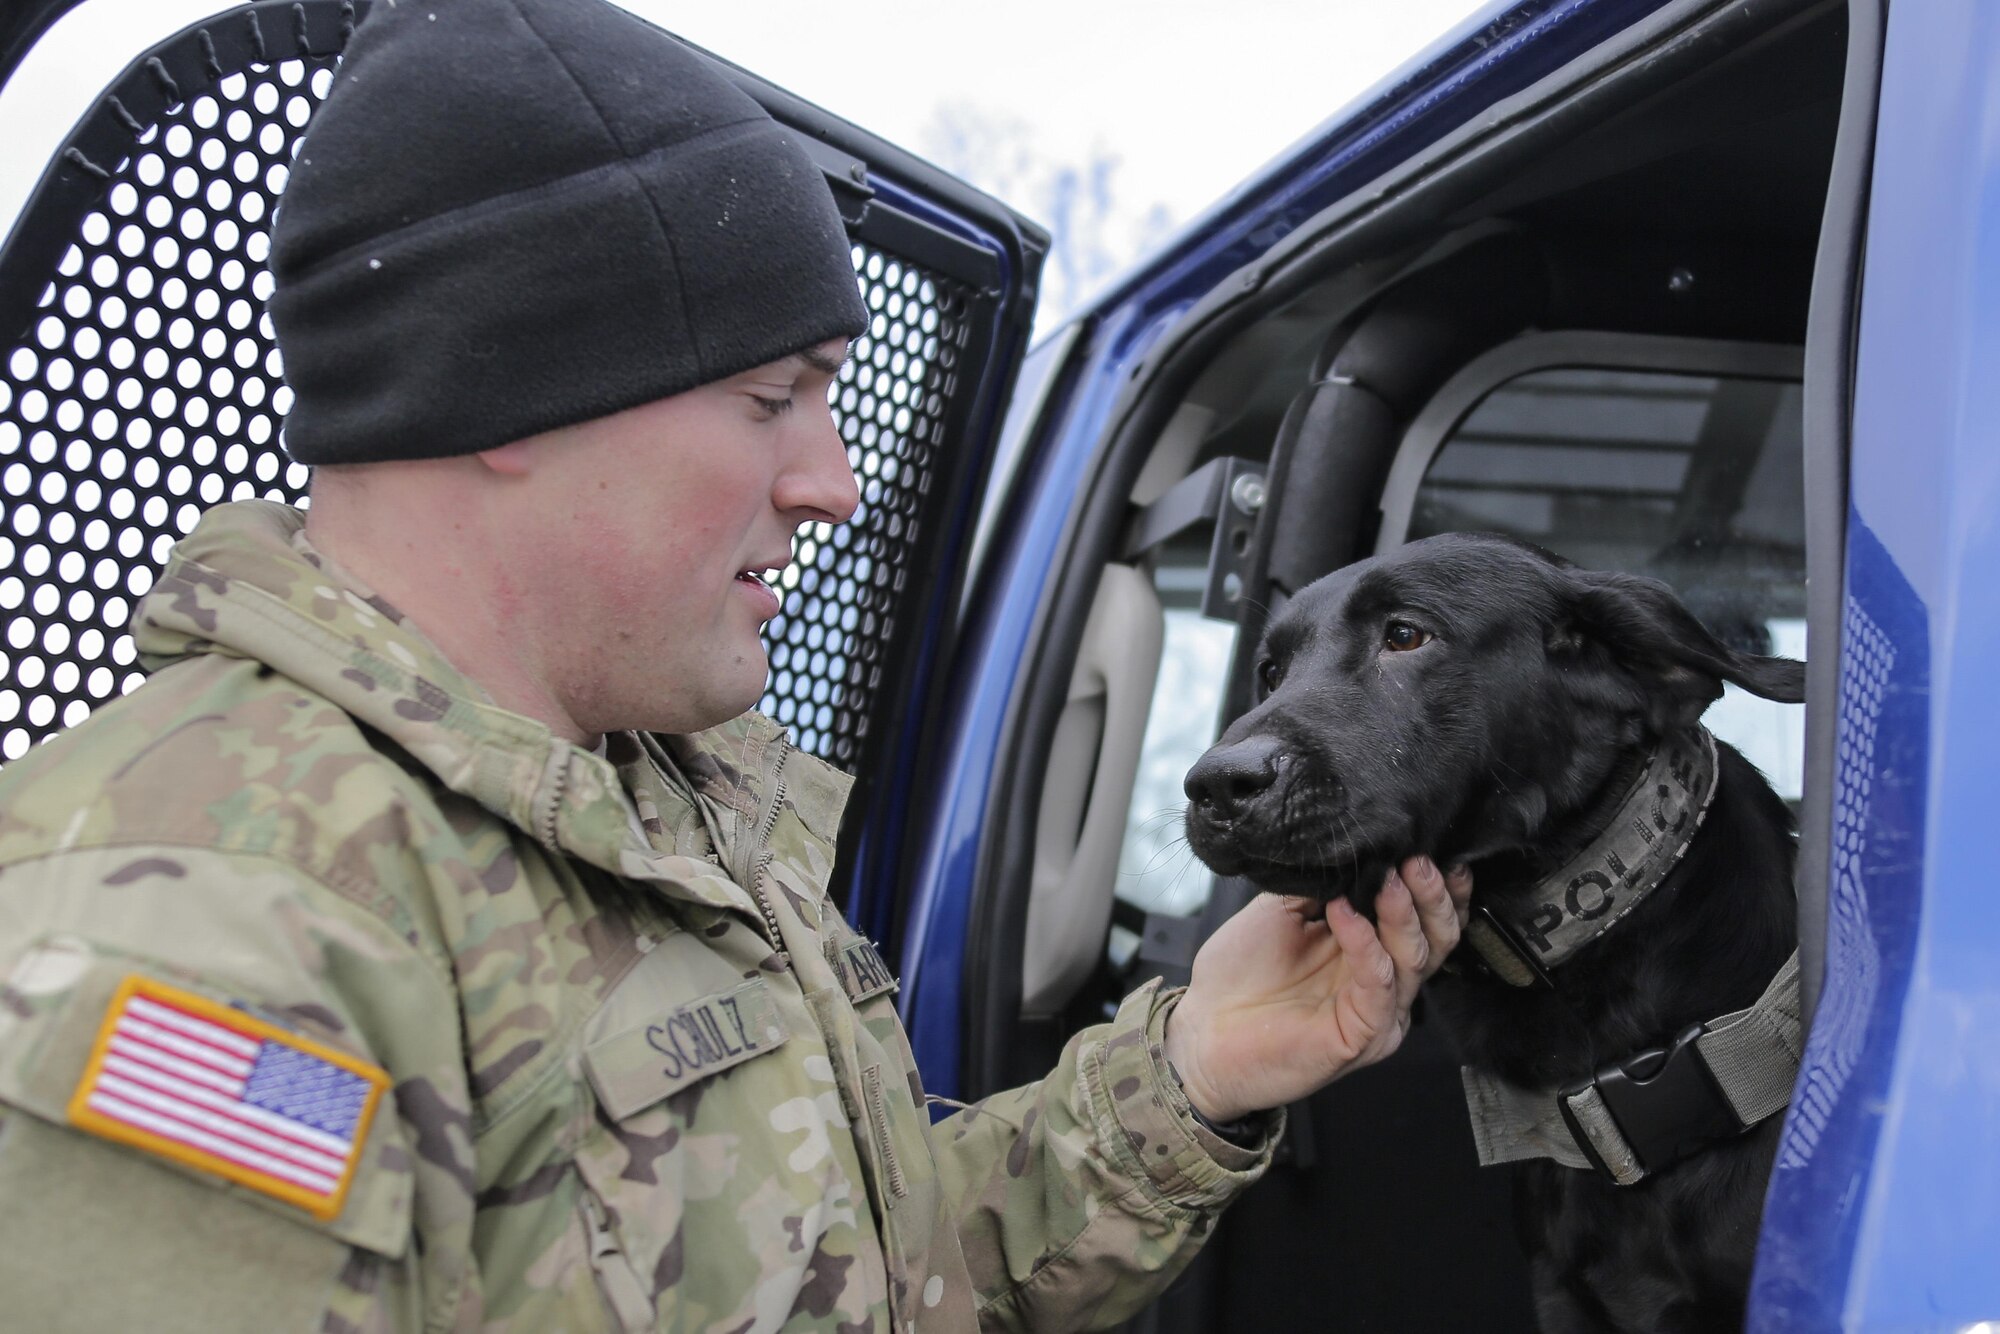 U.S. Army Spc. Jared Shultz, assigned to the 549th Military Working Dog Detachment, interacts with his military working dog, Teddy, while waiting to conduct K-9 training at Joint Base Elmendorf-Richardson, Alaska, March 17, 2016. The Army military working dog handlers continually train with their K-9 counterparts to keep their teams flexible to respond to law enforcement emergencies, and for overseas deployments. (U.S. Air Force photo/Alejandro Pena)